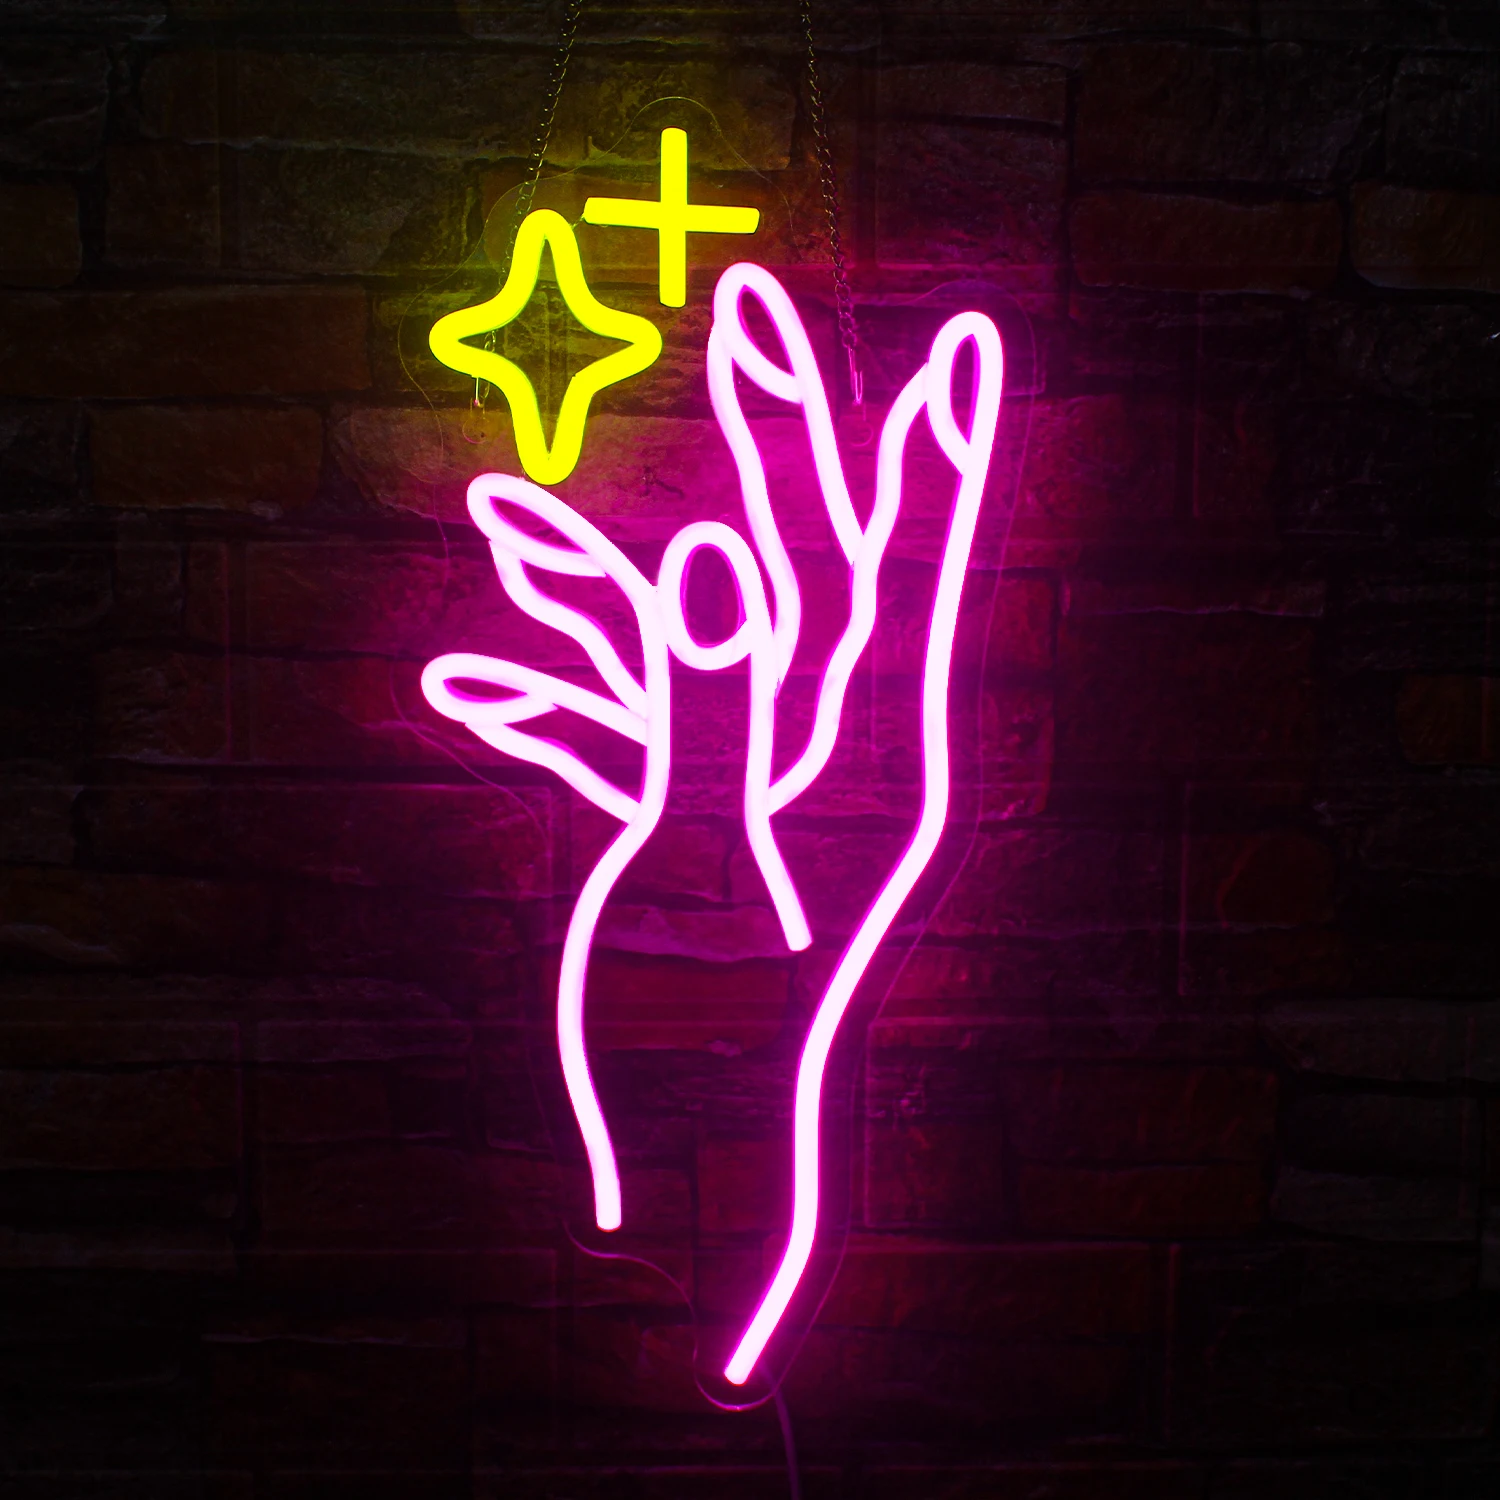 Hand Star Neon Sign Pink Nail Neon Signs Wall Decor Led Signs for Bedroom Girls Room Shop Nail Salon Beauty Room Party Decor